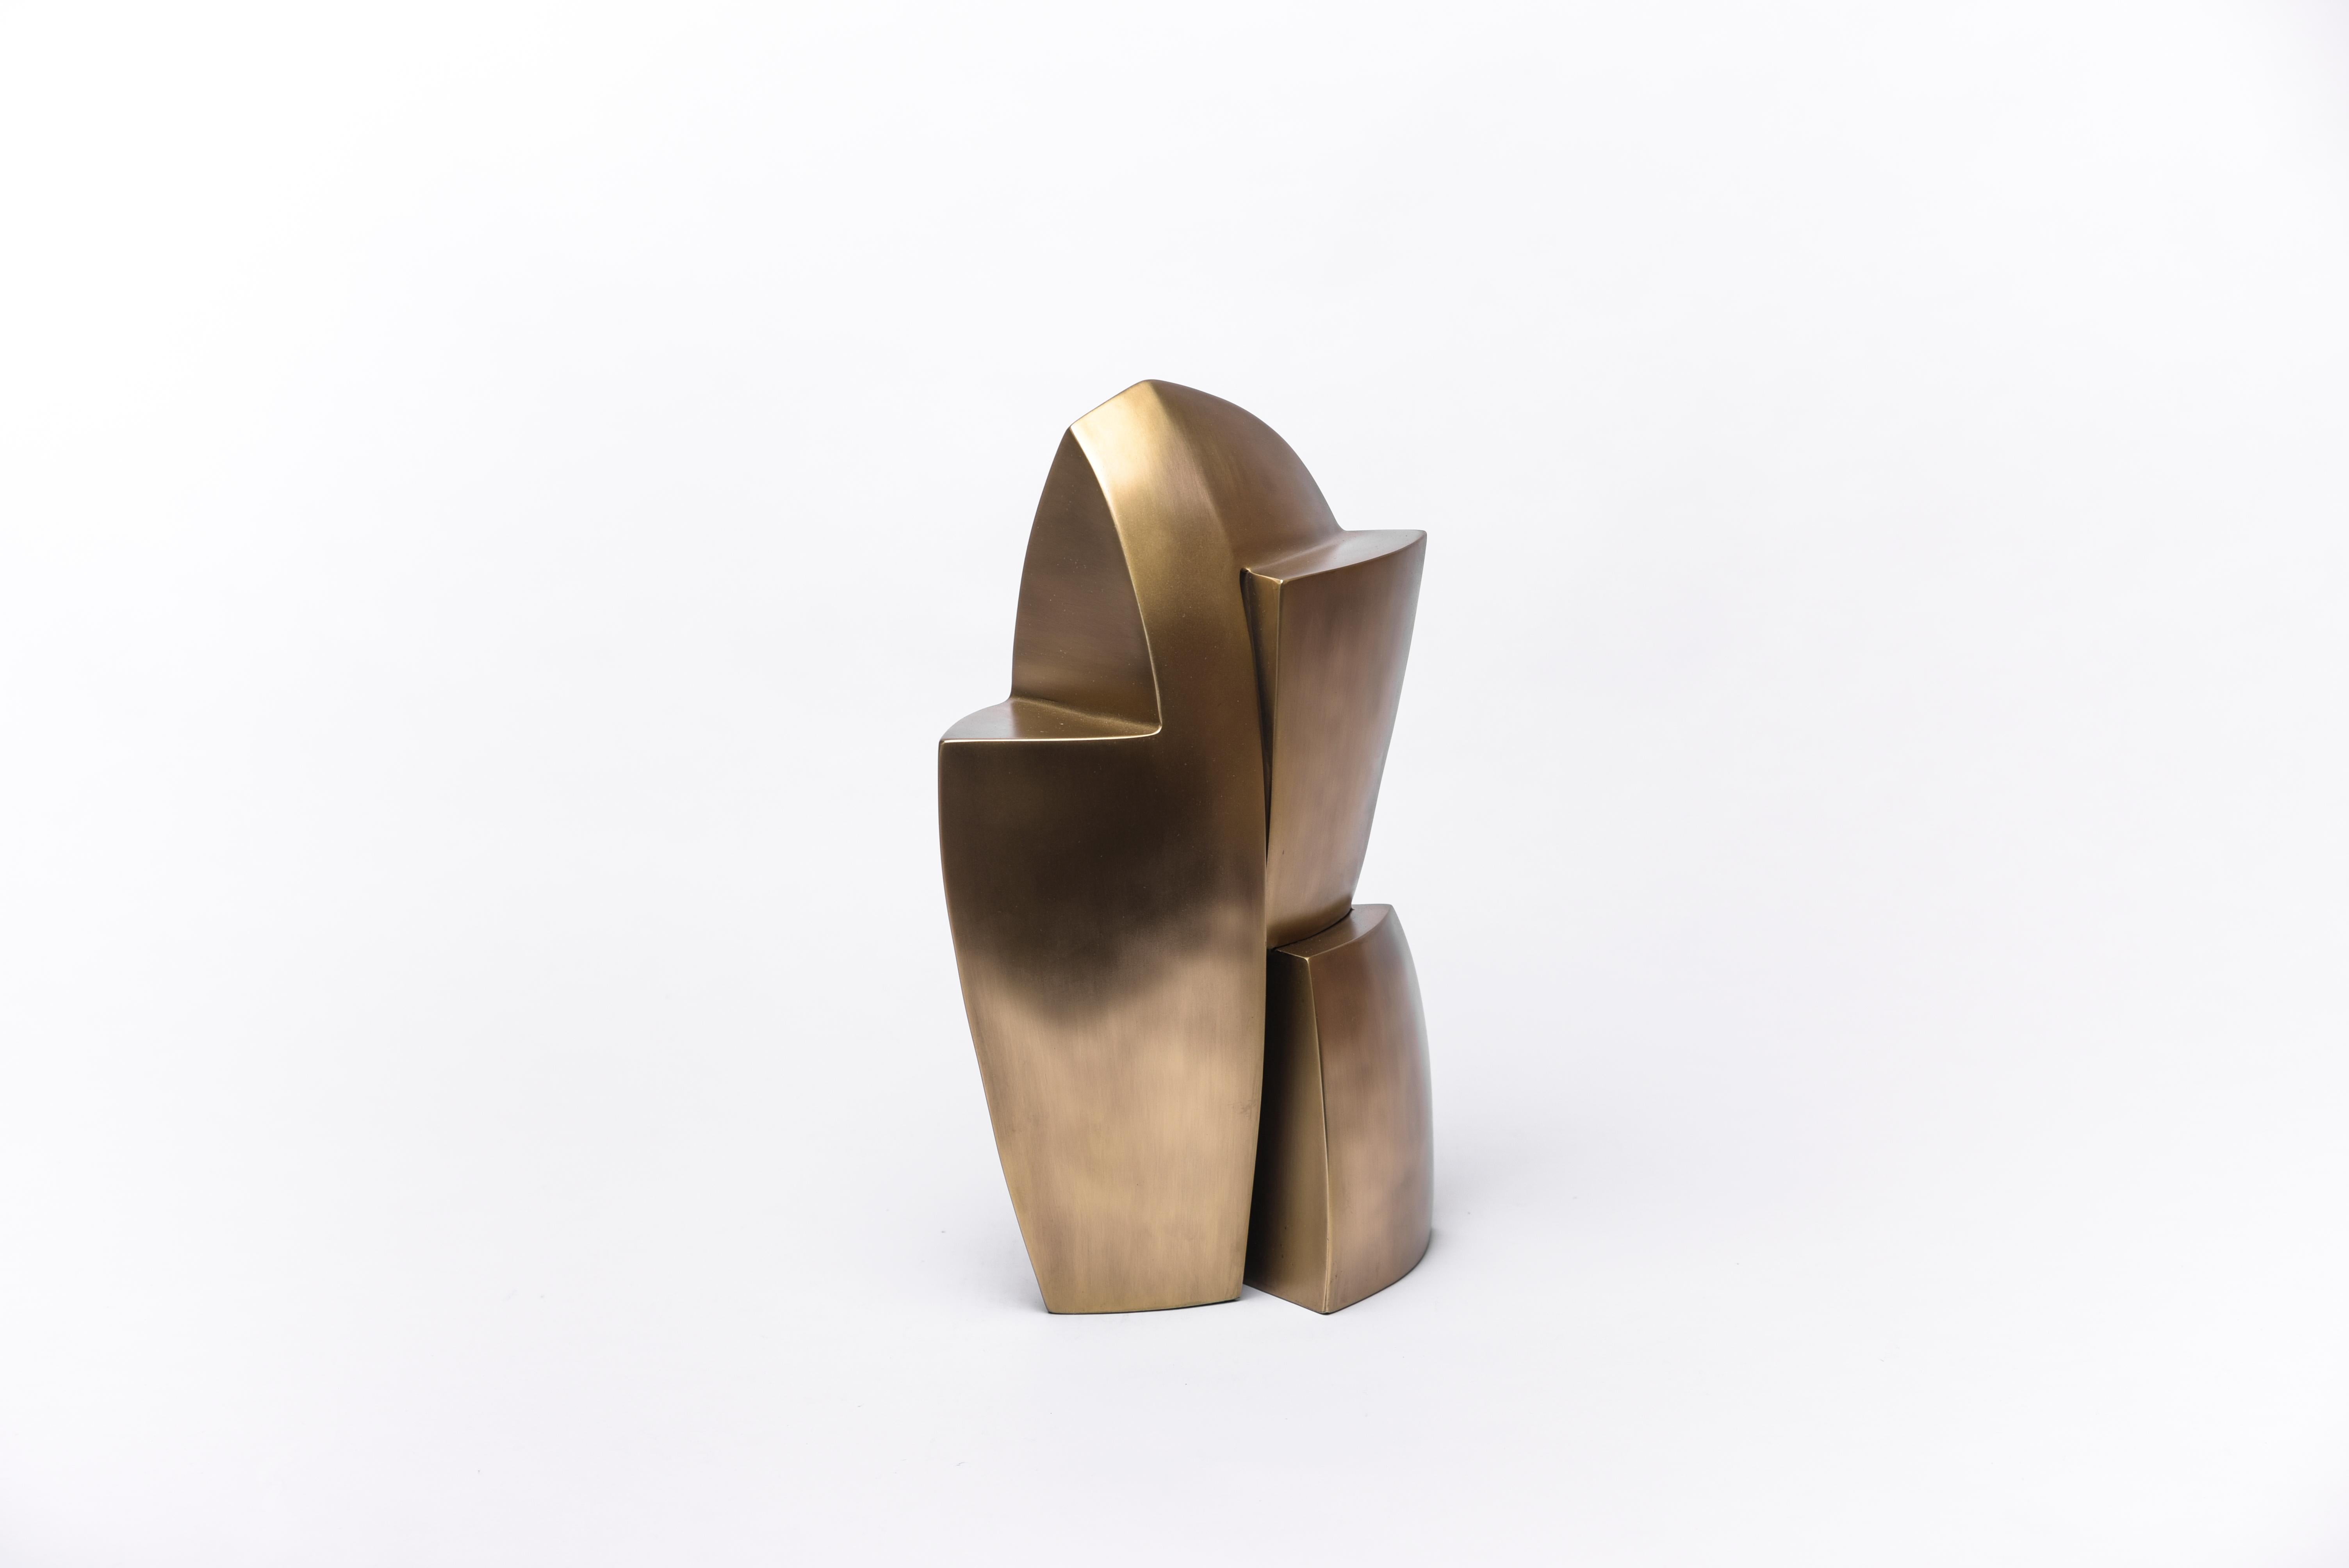 Hand-Crafted Abstract Bronze-Patina Brass Sculpture by Patrick Coard Paris